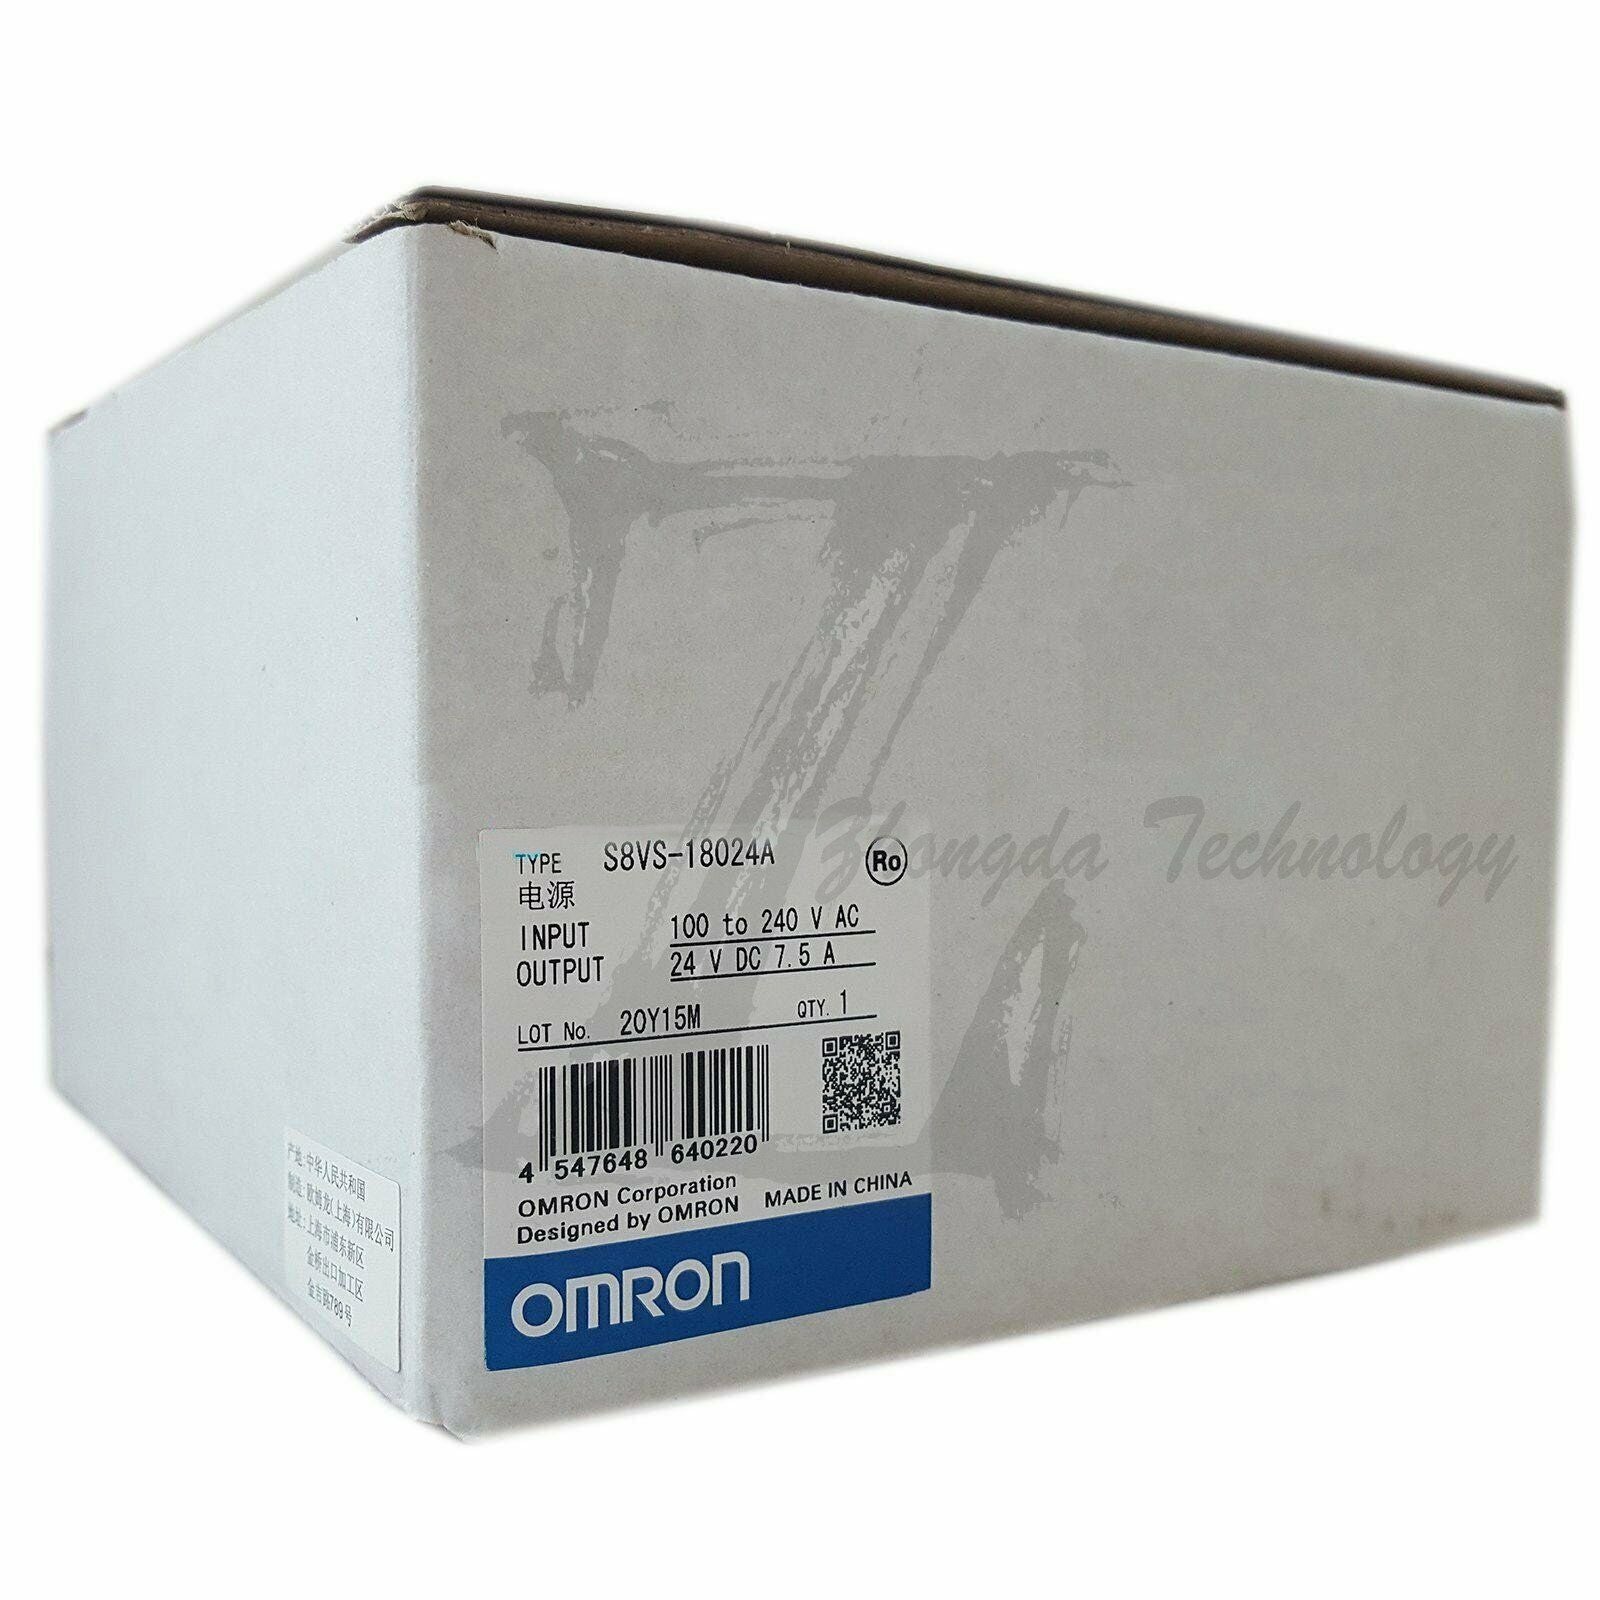 1pcs NEW IN BOX Omron S8VS-18024A switching power supply  1 year warranty KOEED 101-200, 80%, import_2020_10_10_031751, Omron, Other